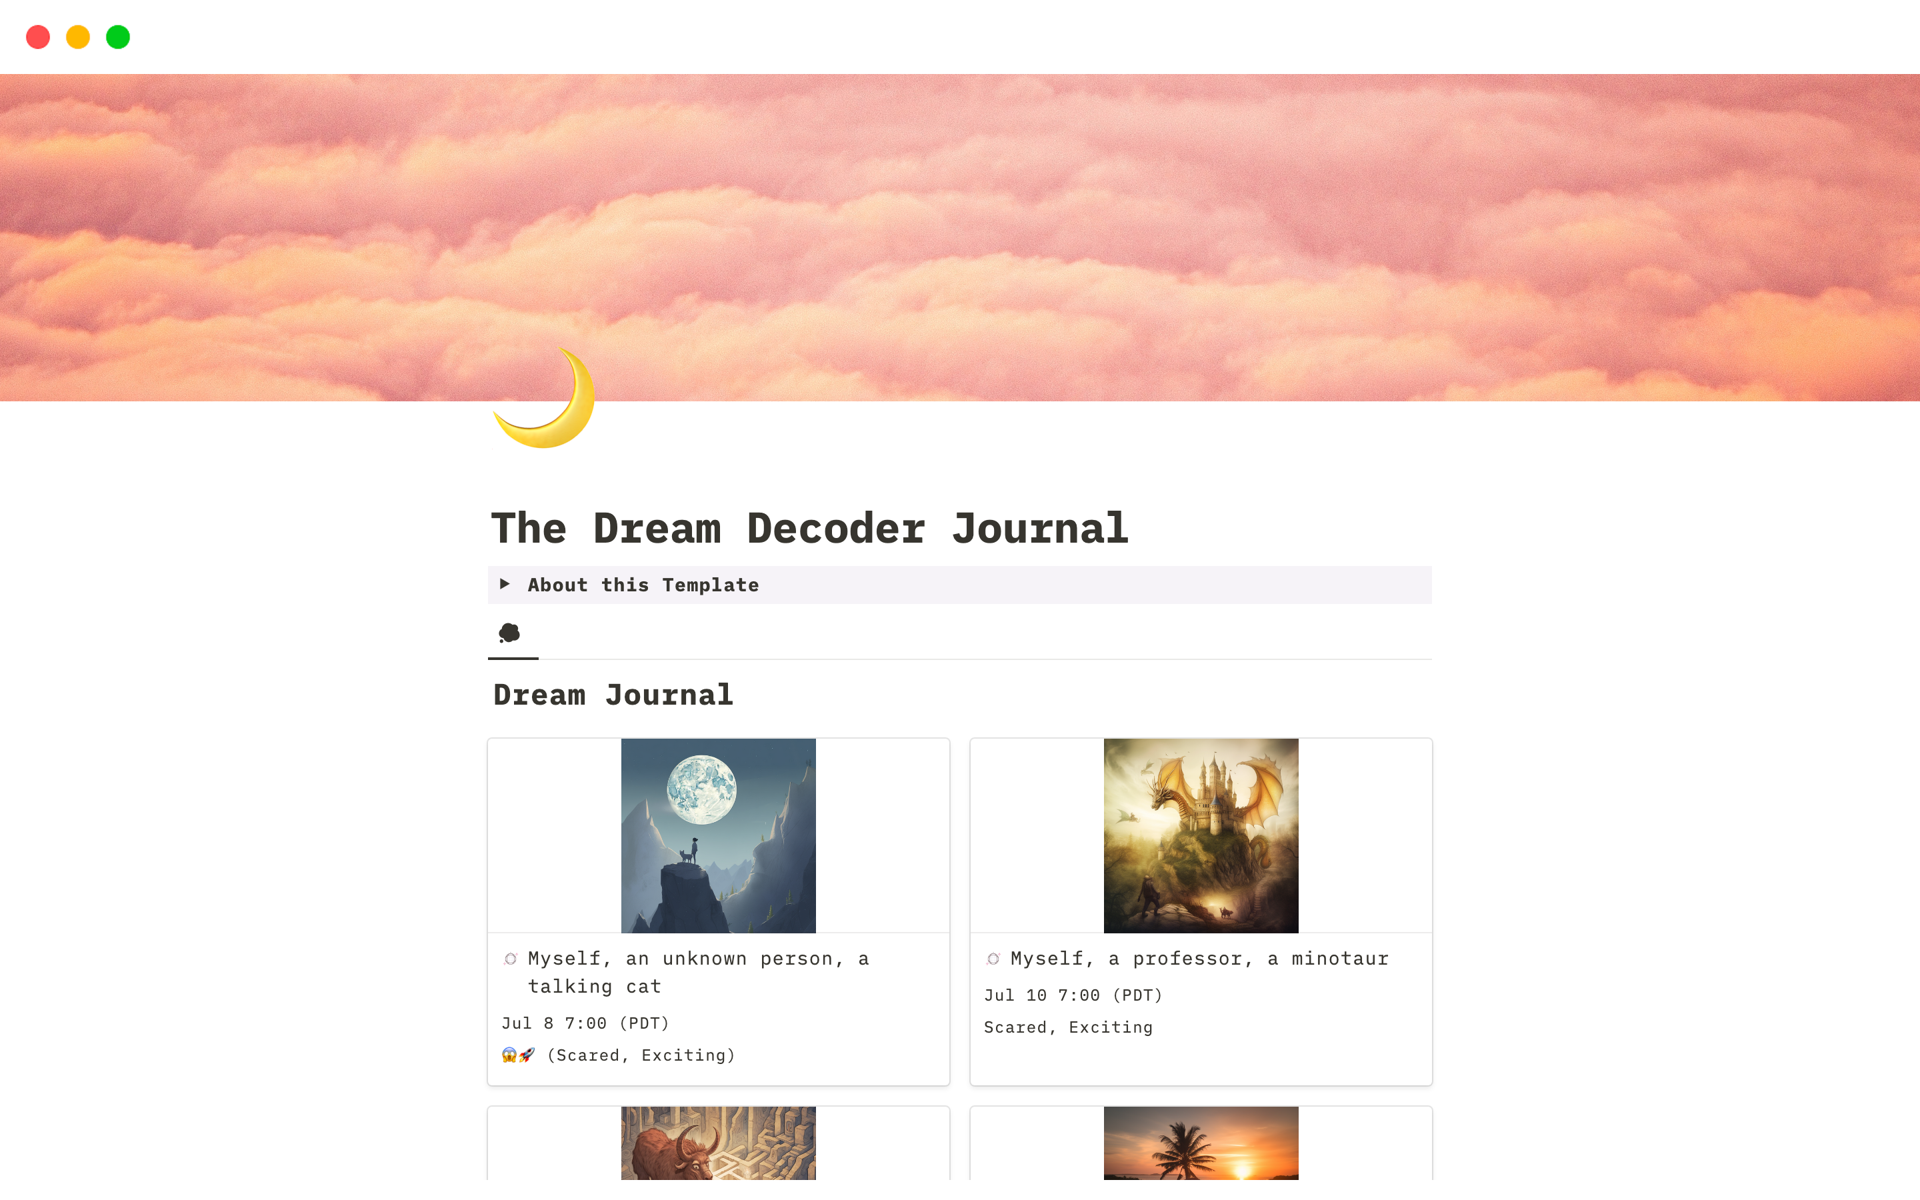 This dream decoder journal makes it enjoyable to record, explore, and learn about your dreams.